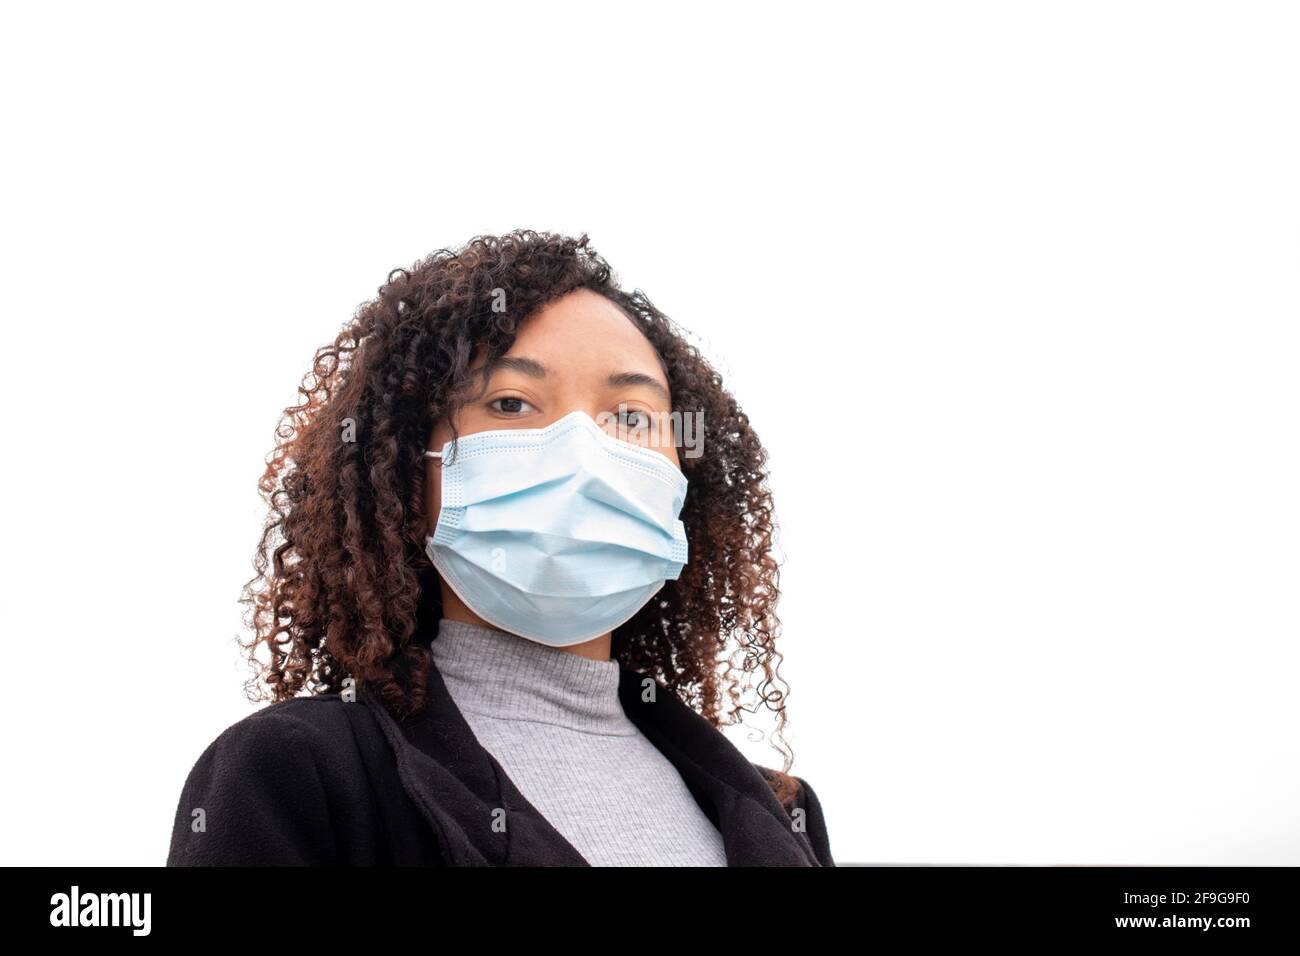 Beautiful dark-skinned young woman with curly hair wearing a protective mask against the COVID virus looks confidently at the camera. Stock Photo